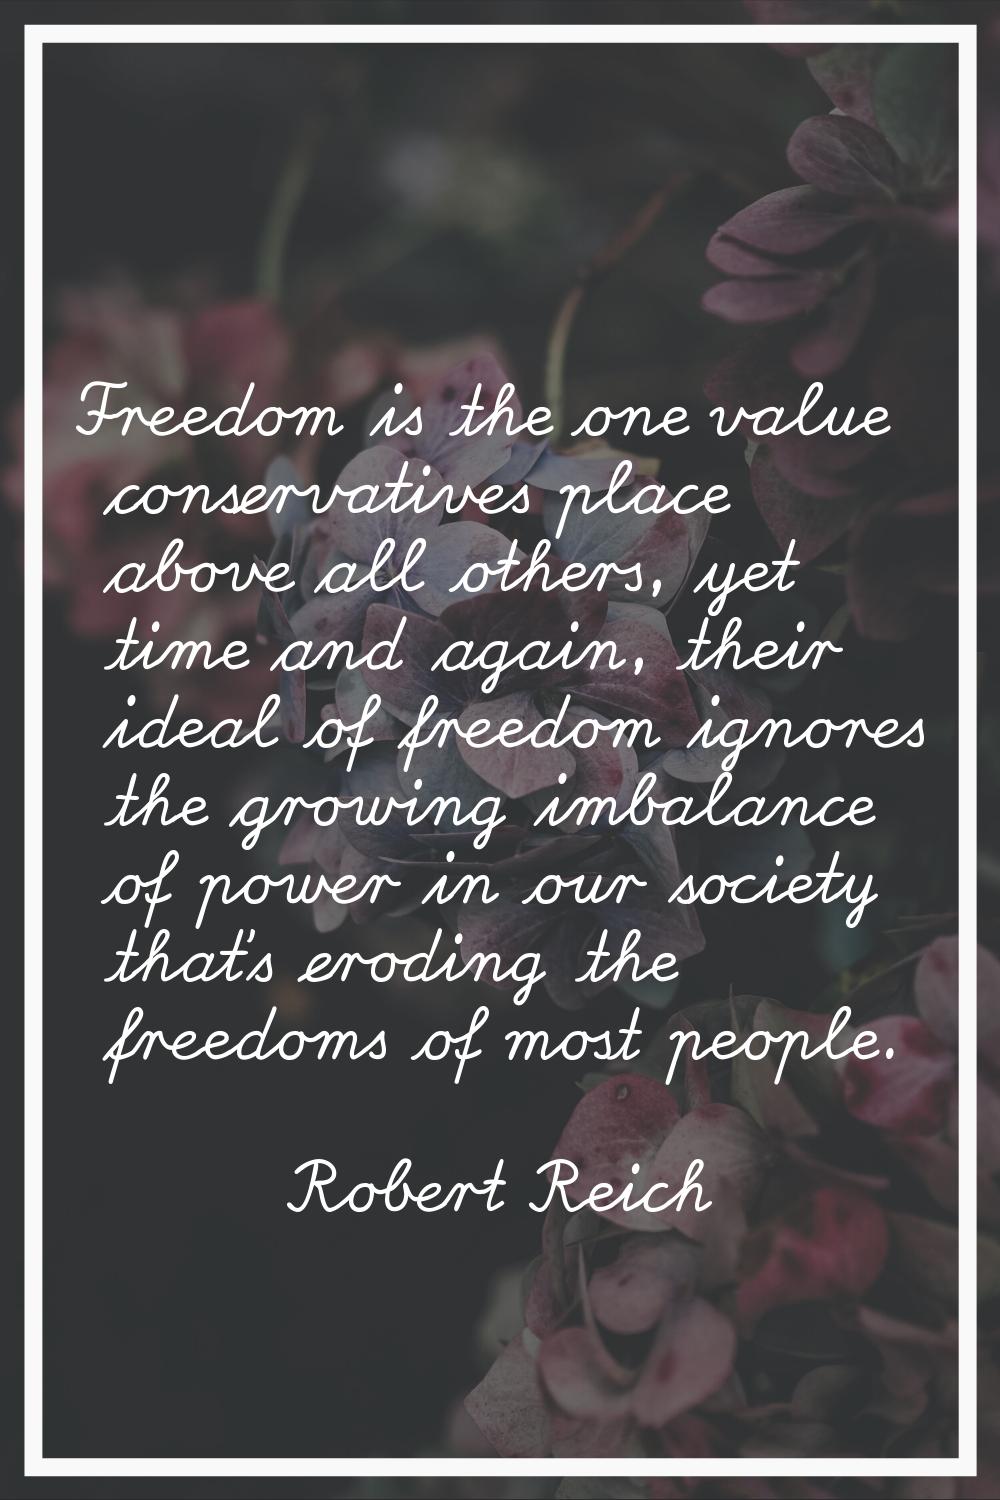 Freedom is the one value conservatives place above all others, yet time and again, their ideal of f